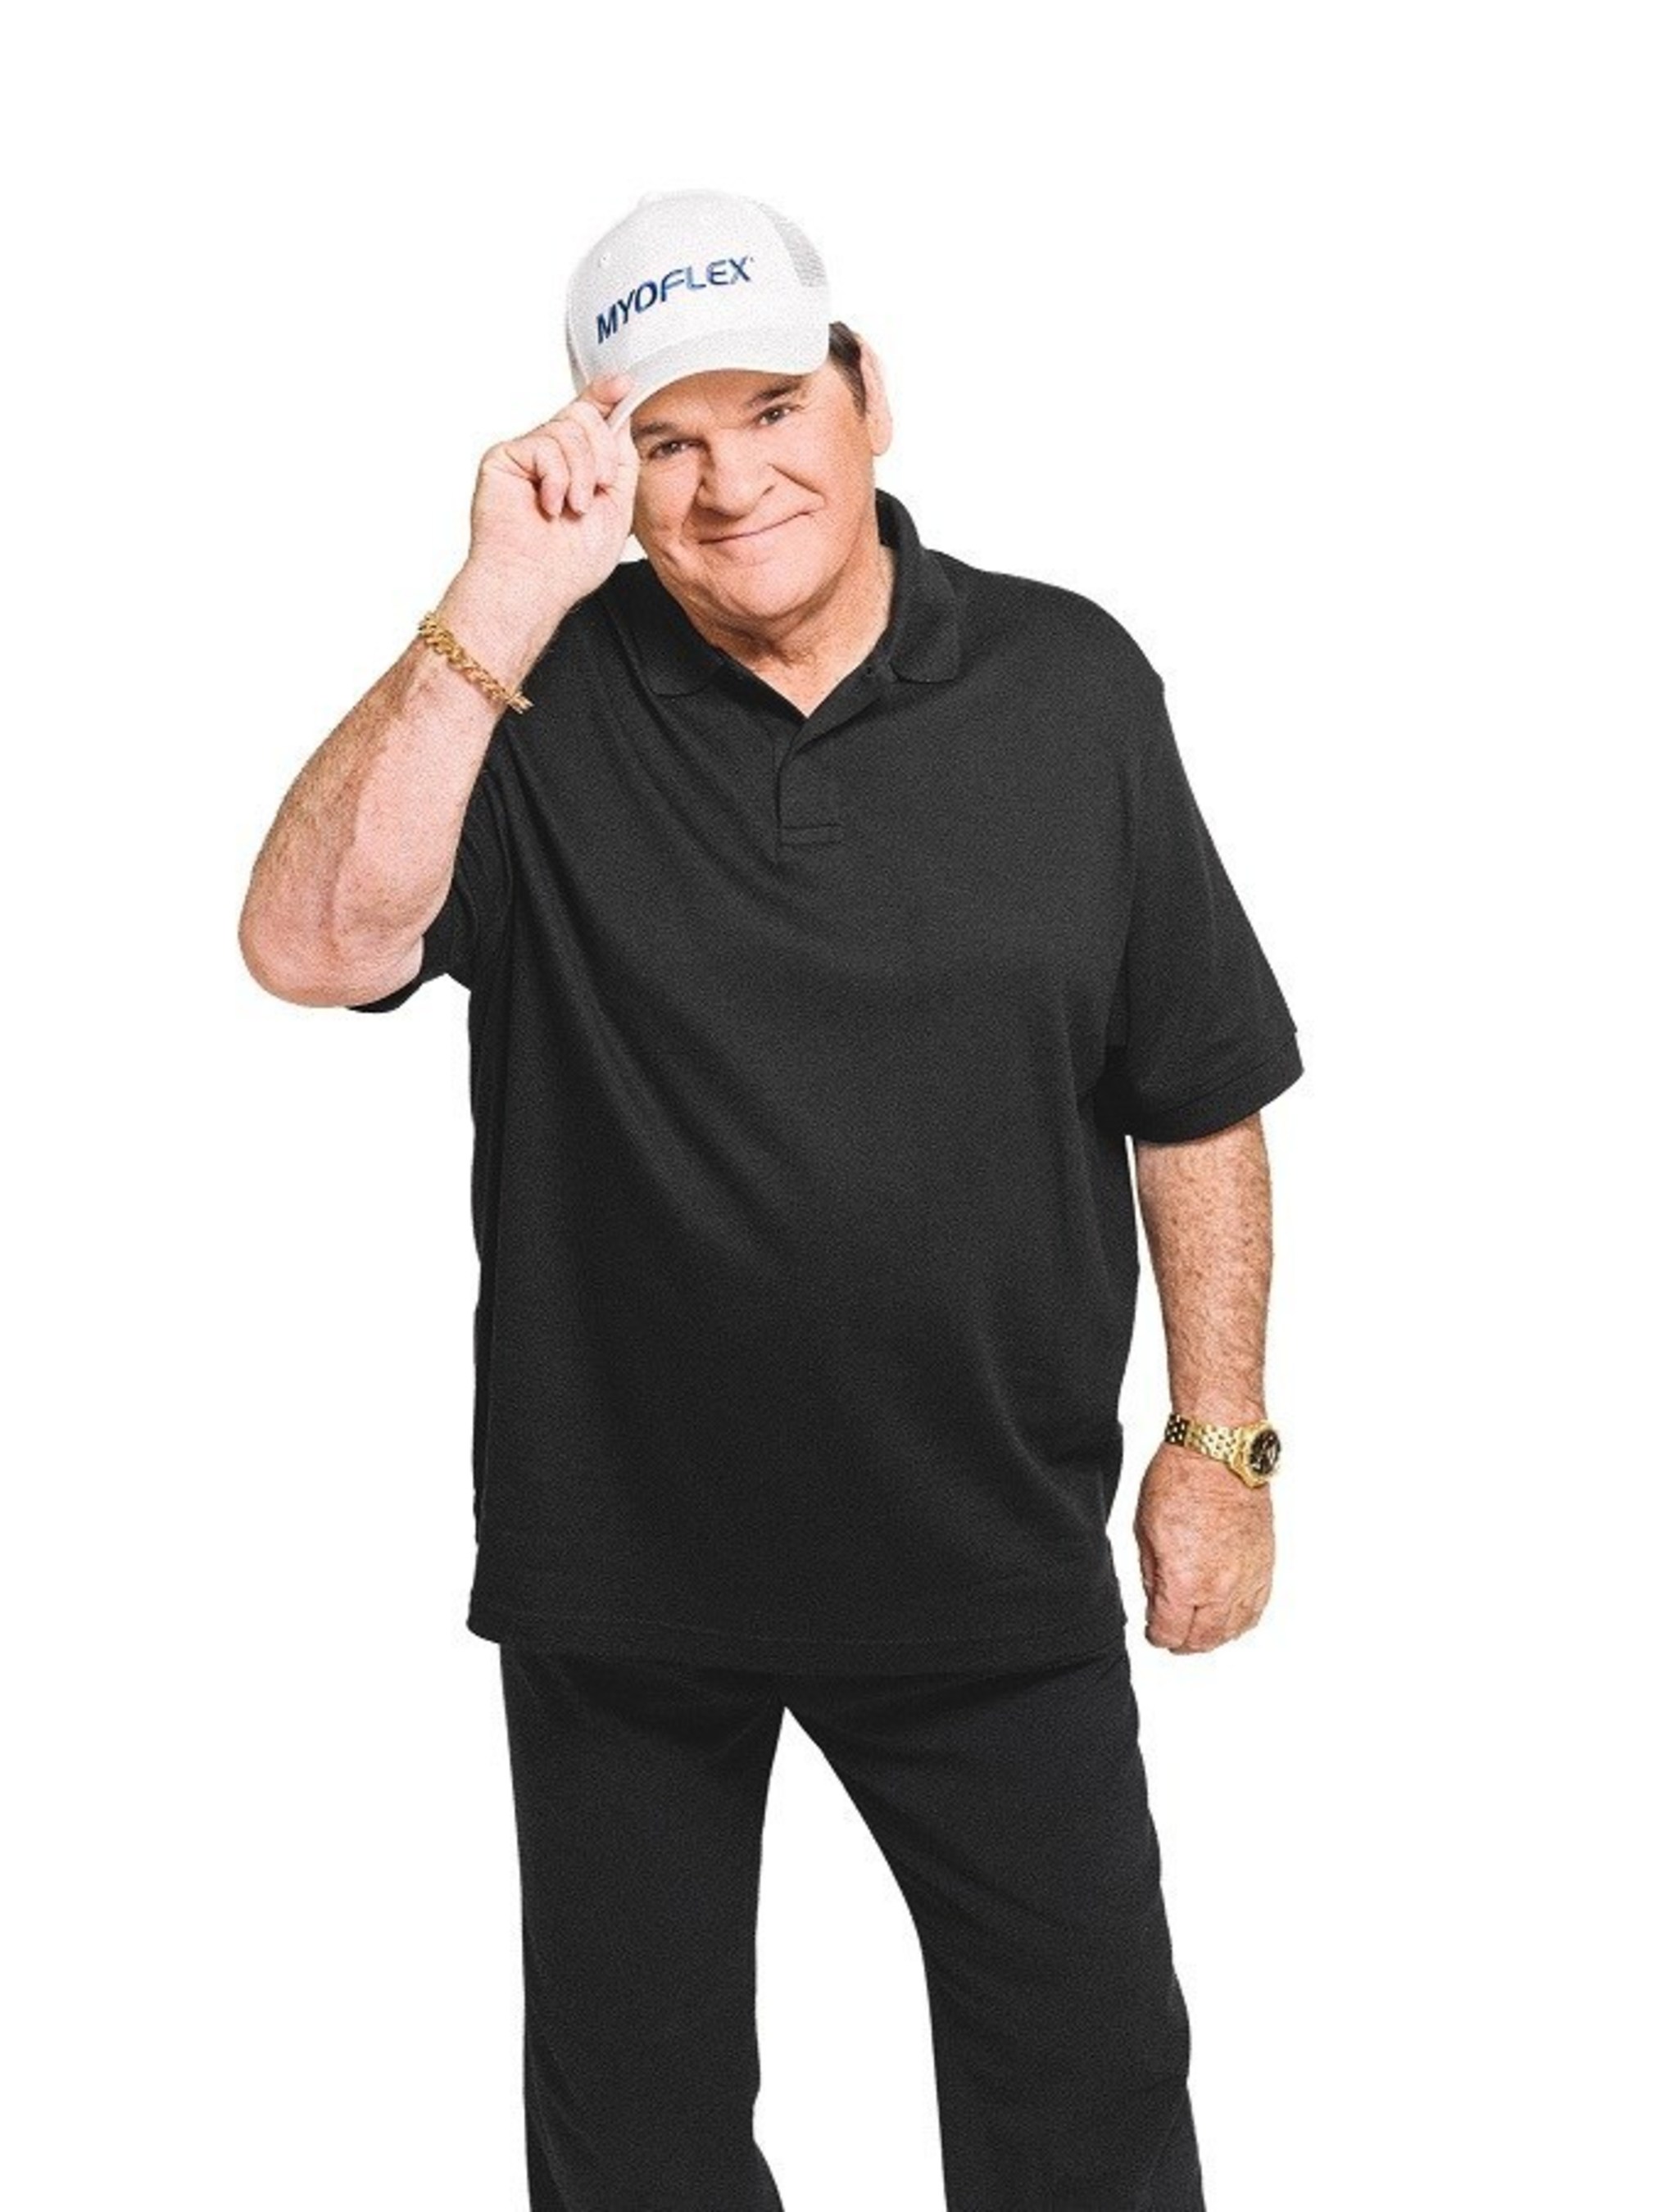 Baseball's all-time hits leader Pete Rose is the new spokesperson for Myoflex, a joint, muscle and arthritis pain reliever.